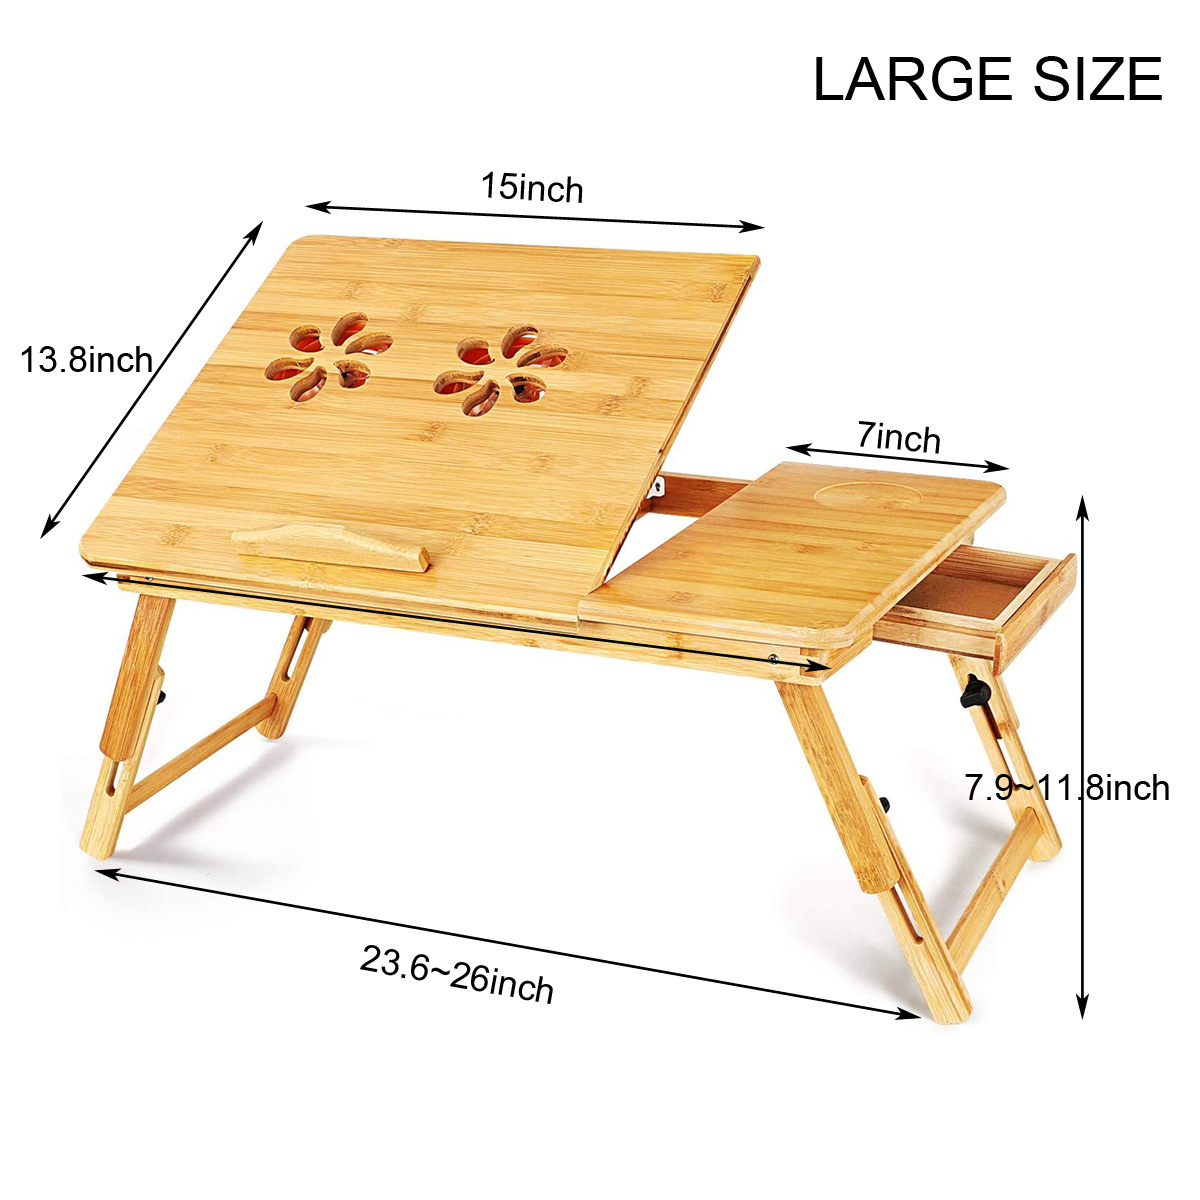 Bamboo-Laptop-Desk-Stand-Lap-Desk-Table-Flower-Pattern-Foldable-Breakfast-Serving-Bed-Tray-with-Stor-1798257-5